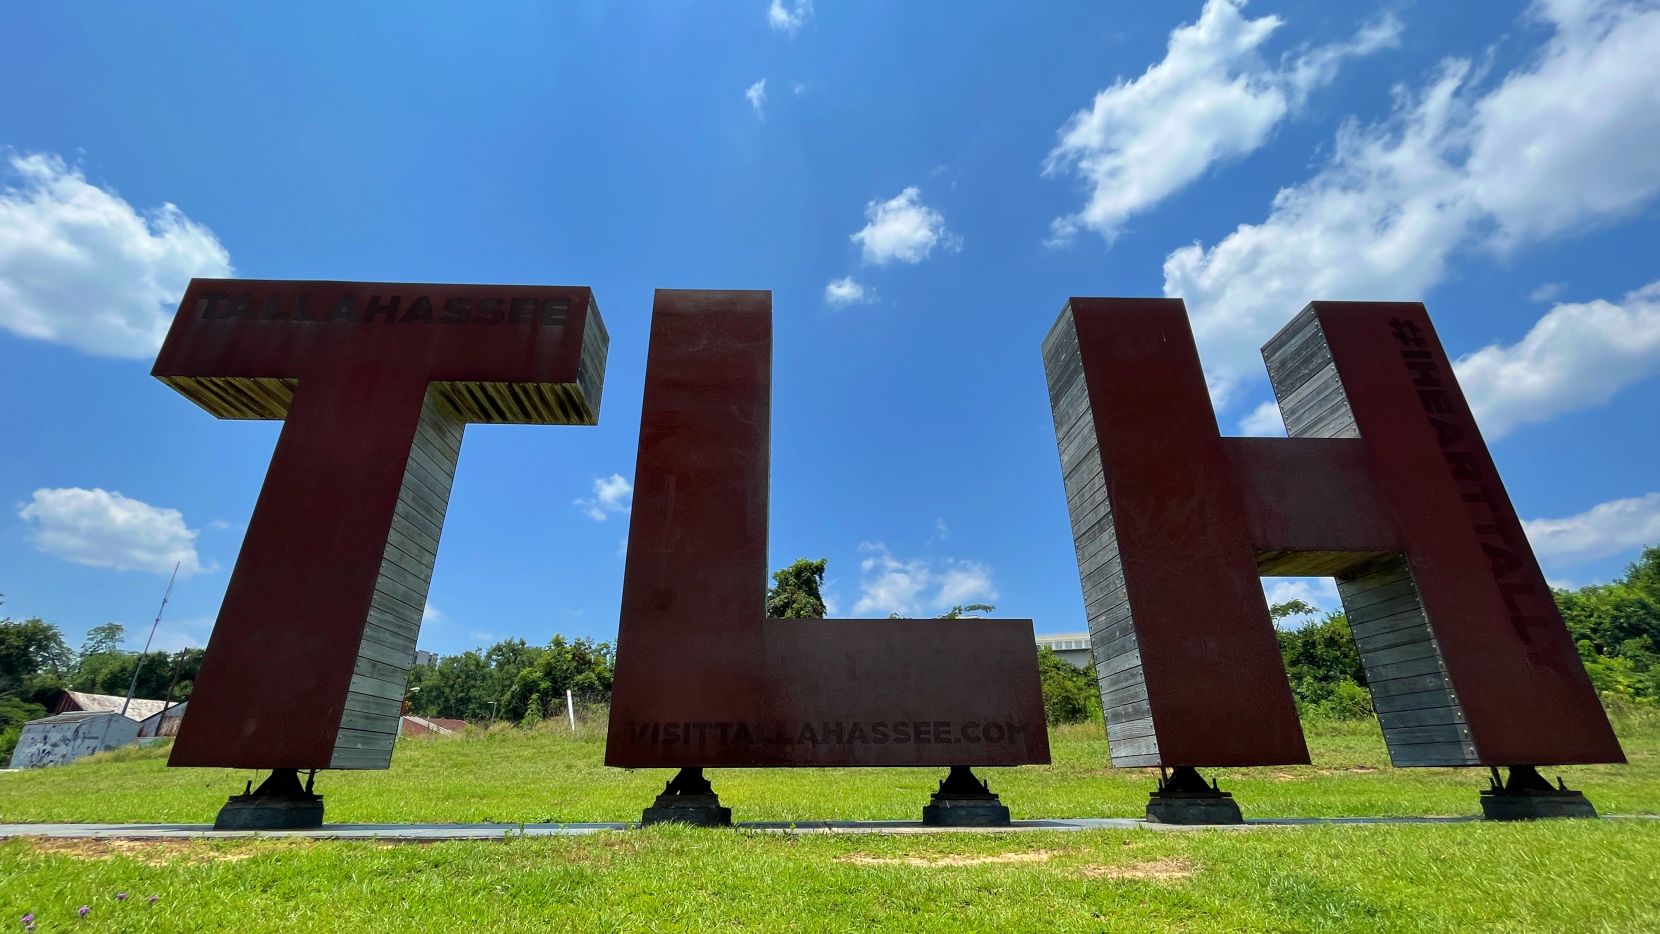 Large sculpture of the letters TLH made out of metal and wood.